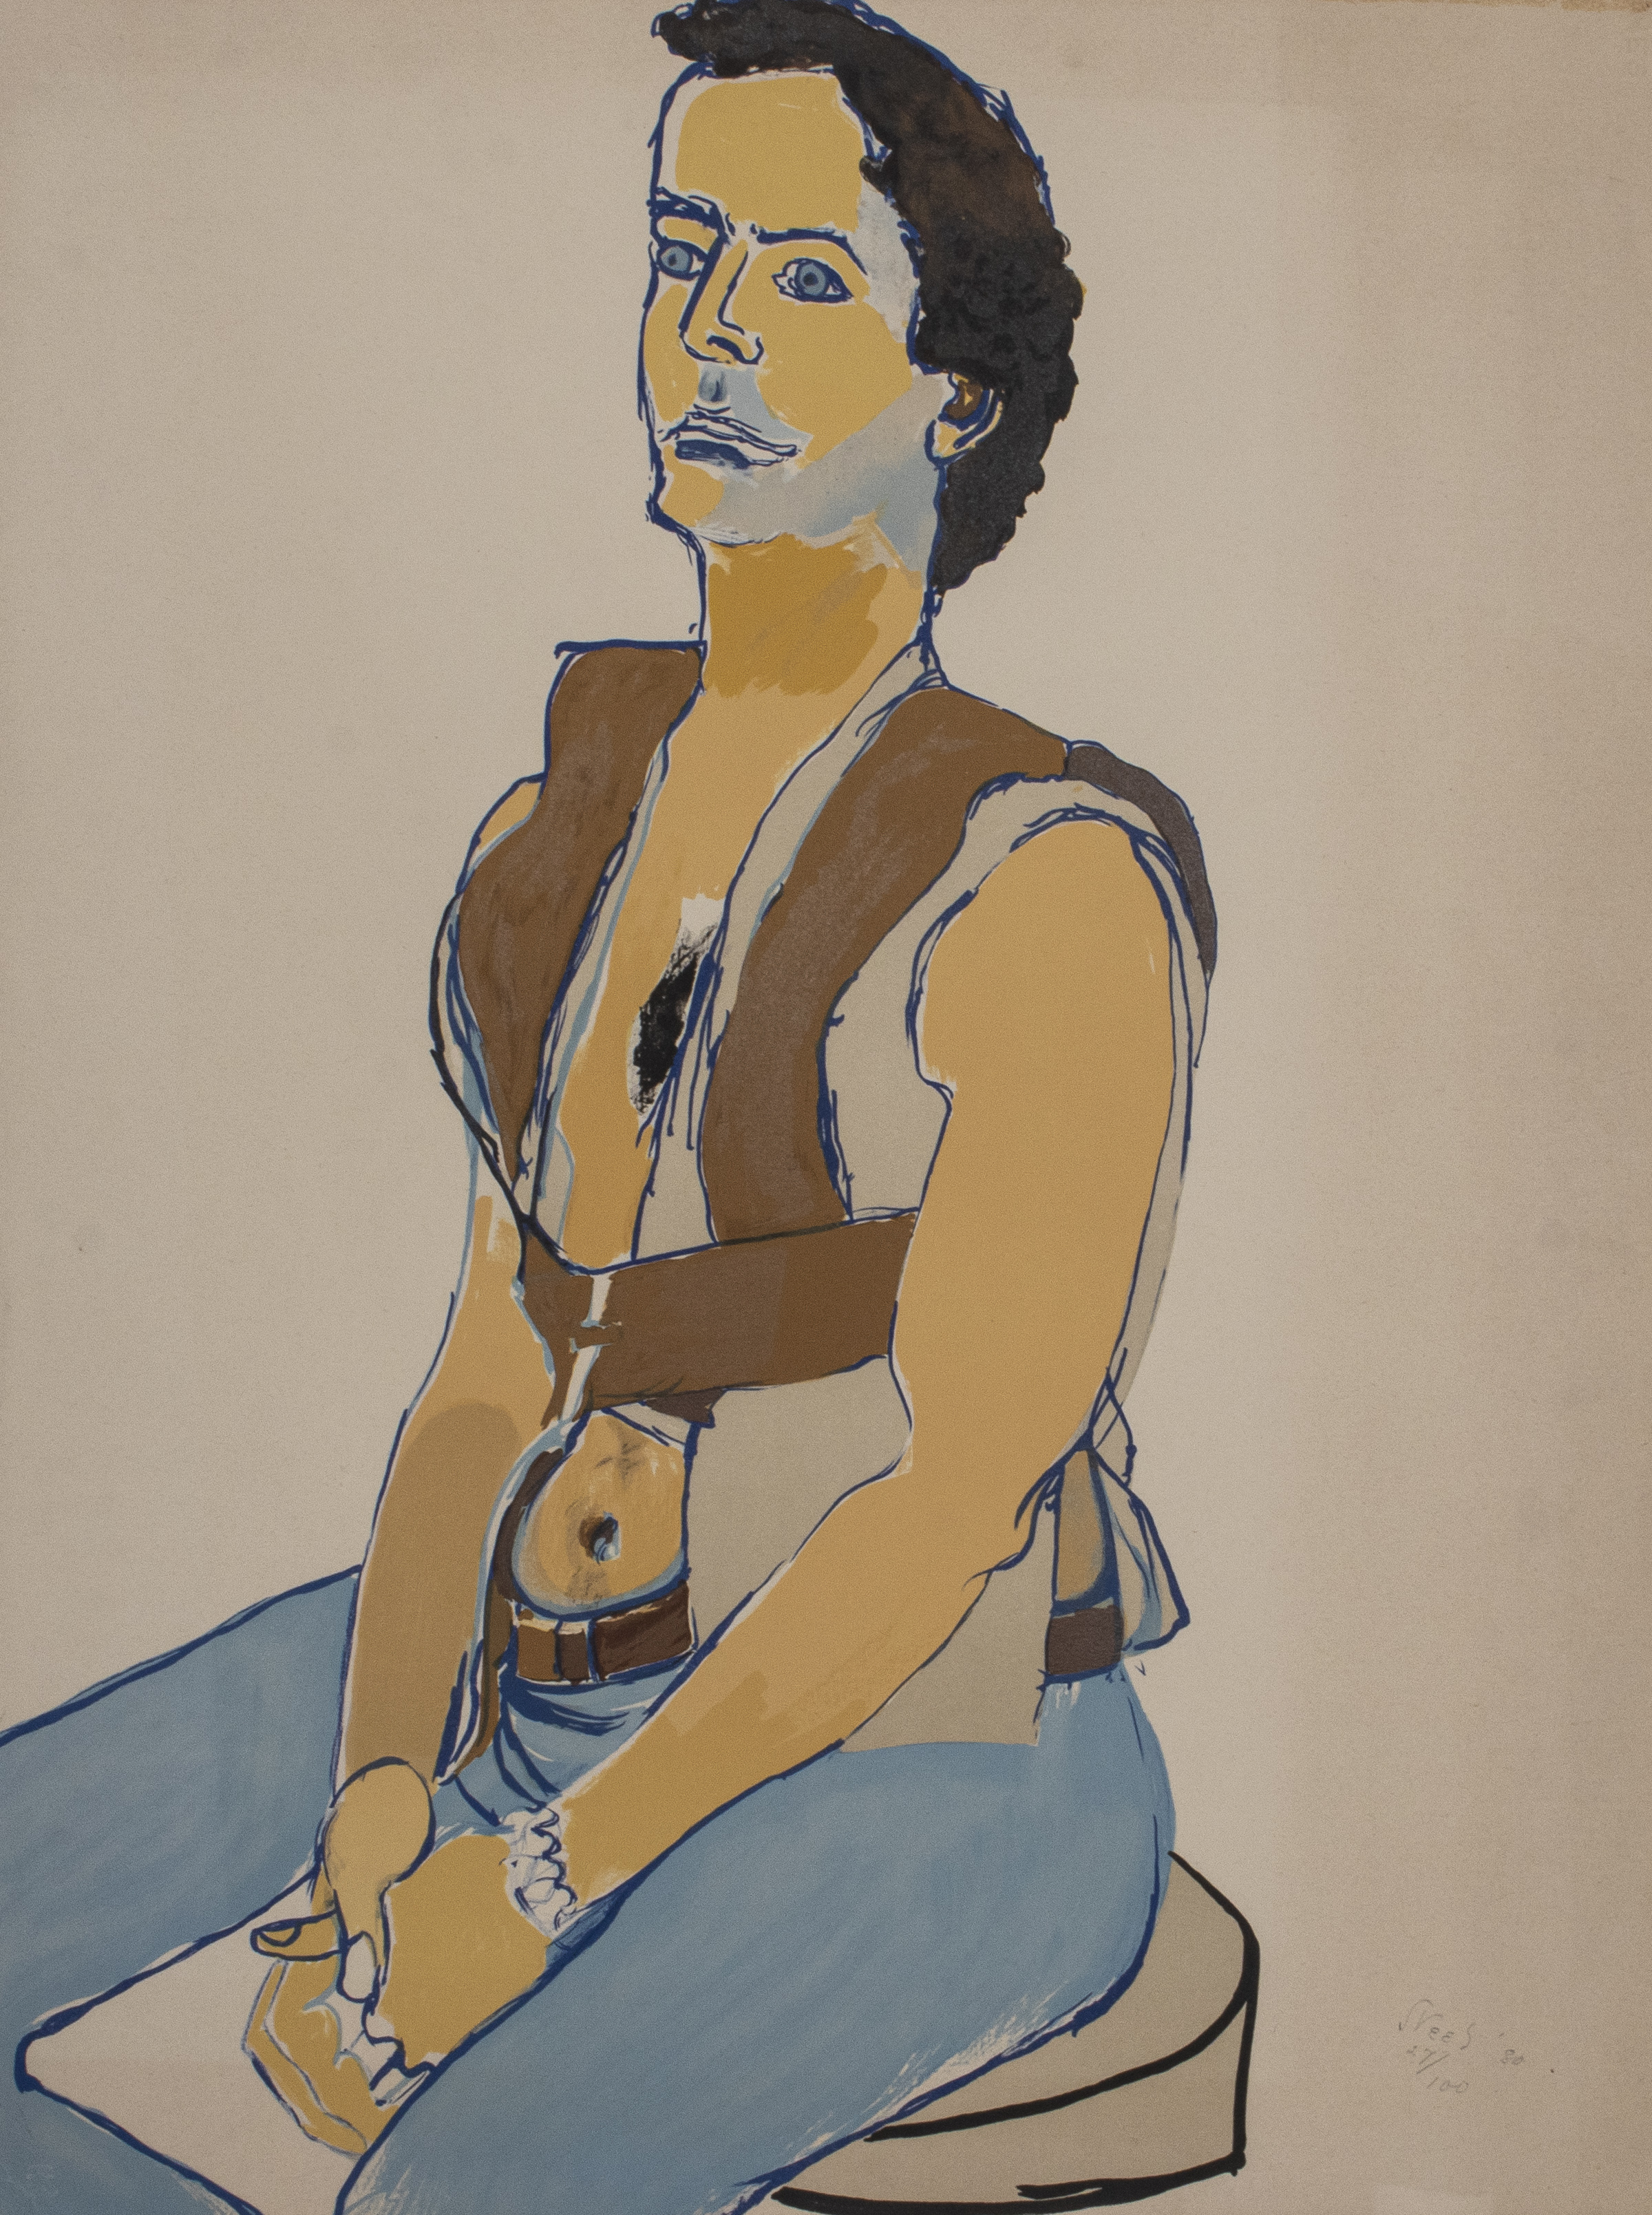 ALICE NEEL "MAN IN HARNESS" LITHOGRAPH,